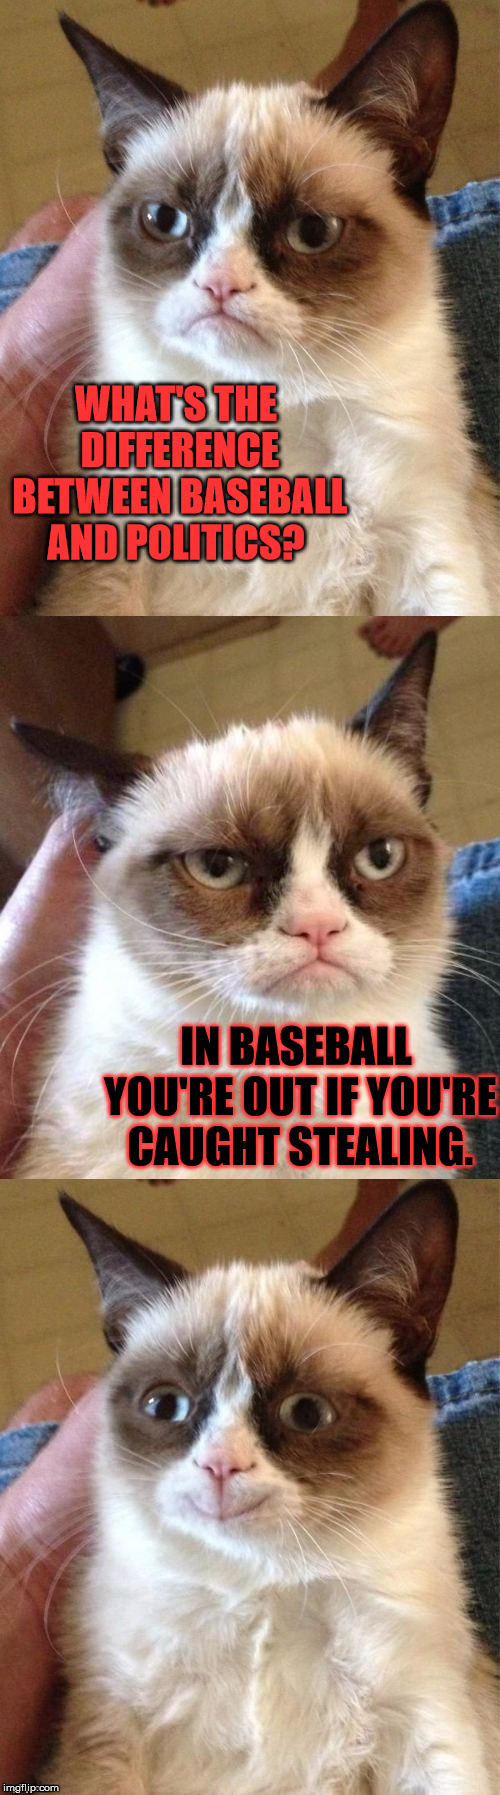 Fundamental differences | WHAT'S THE DIFFERENCE BETWEEN BASEBALL AND POLITICS? IN BASEBALL YOU'RE OUT IF YOU'RE CAUGHT STEALING. | image tagged in bad pun grumpy cat,funny,memes,politics,sports | made w/ Imgflip meme maker